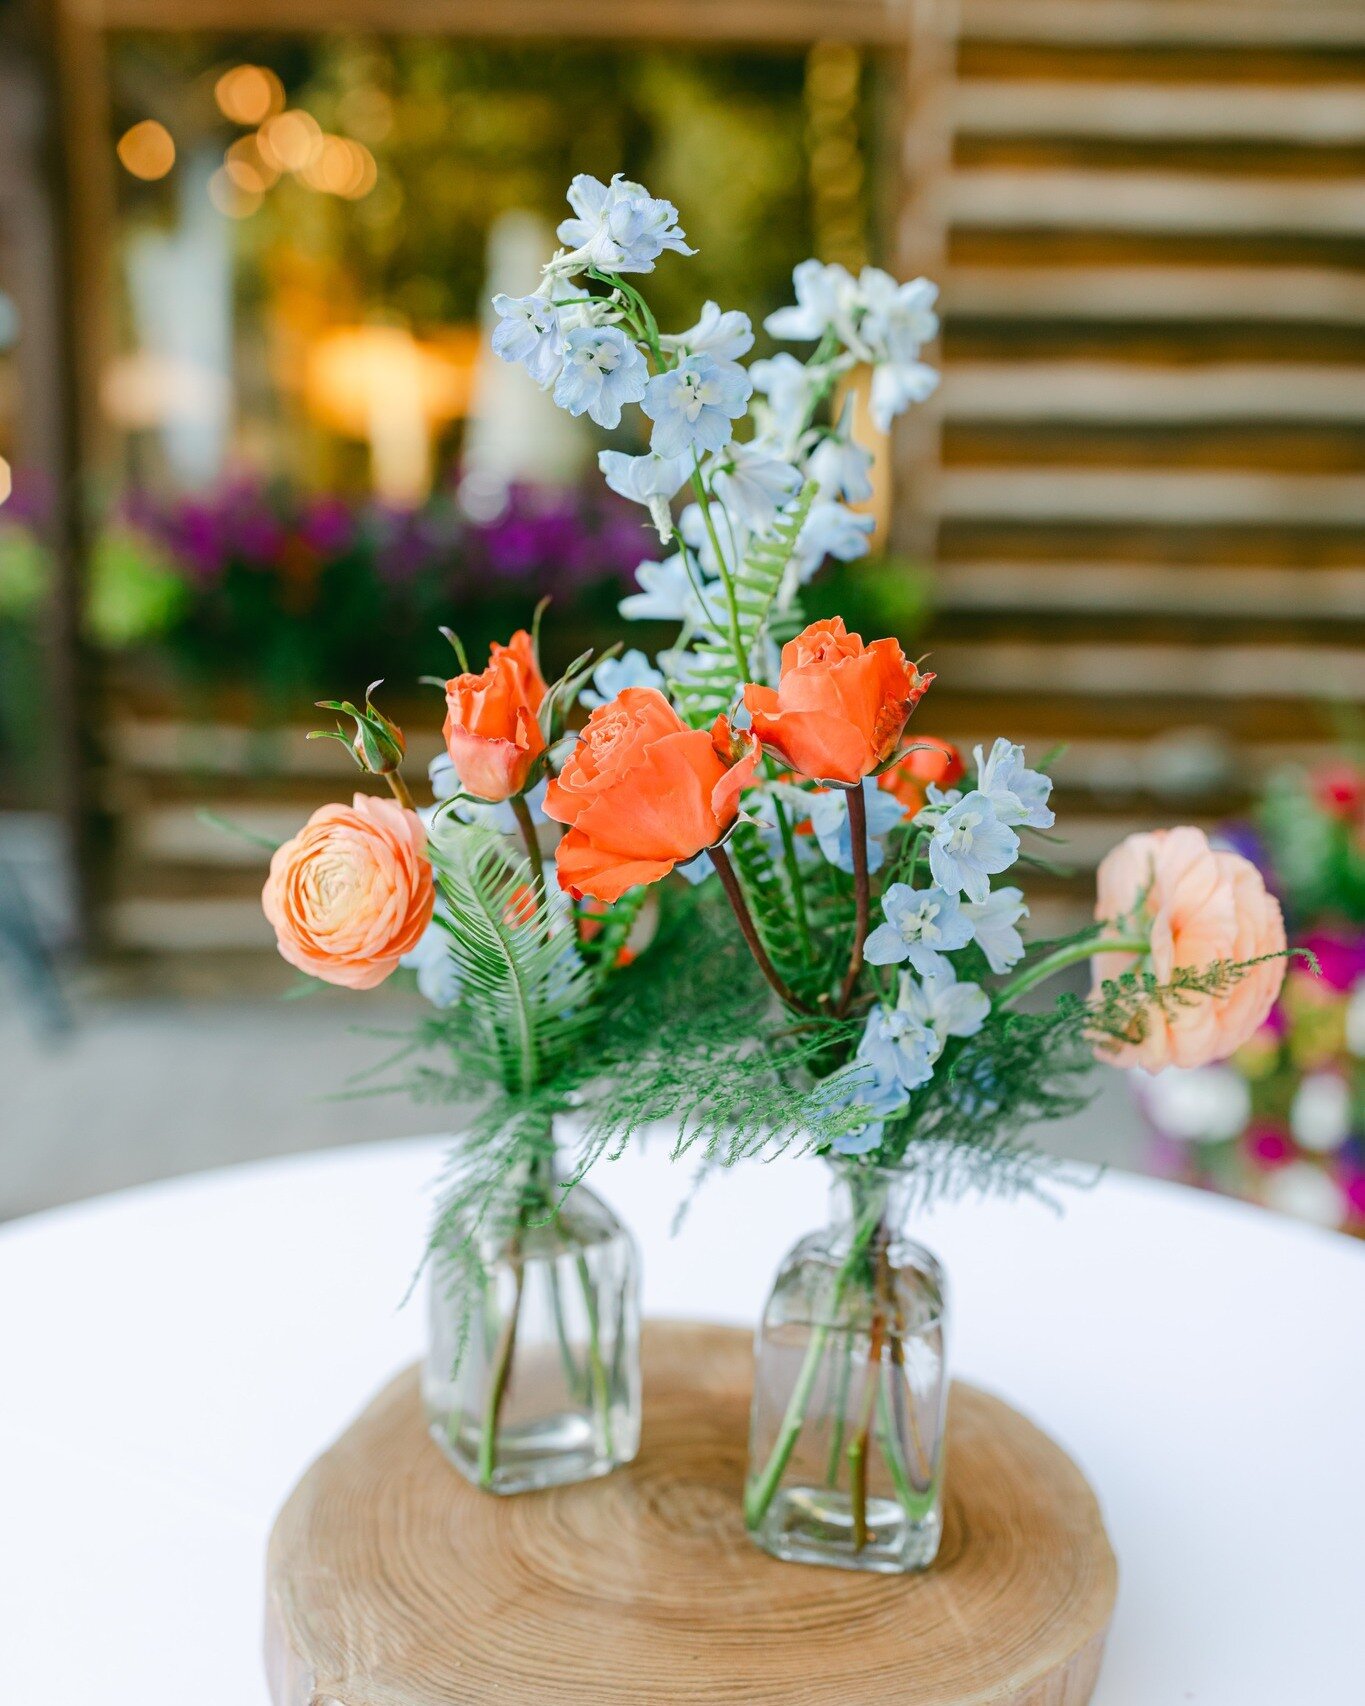 Get ready to swoon over some enchanting centerpieces, bursting with vibrant blooms and whimsical touches. From delicate pastels to lush greenery we want to help add a little sparkle to your big day.

📸 @laurafoote
✨ @jess_pinkcevents
📍#skitiplodge 